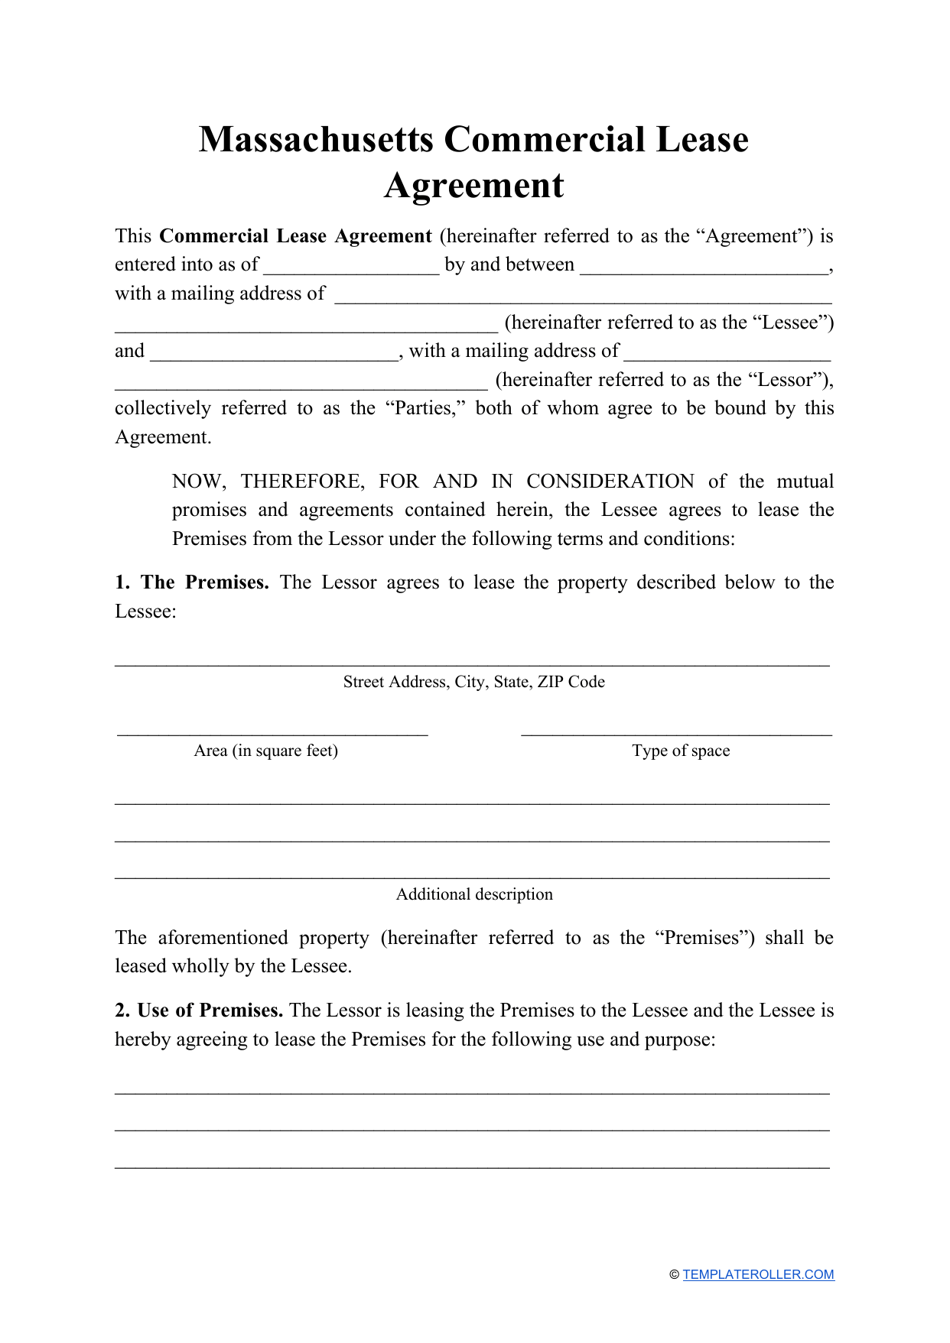 Commercial Lease Agreement Template - Massachusetts, Page 1